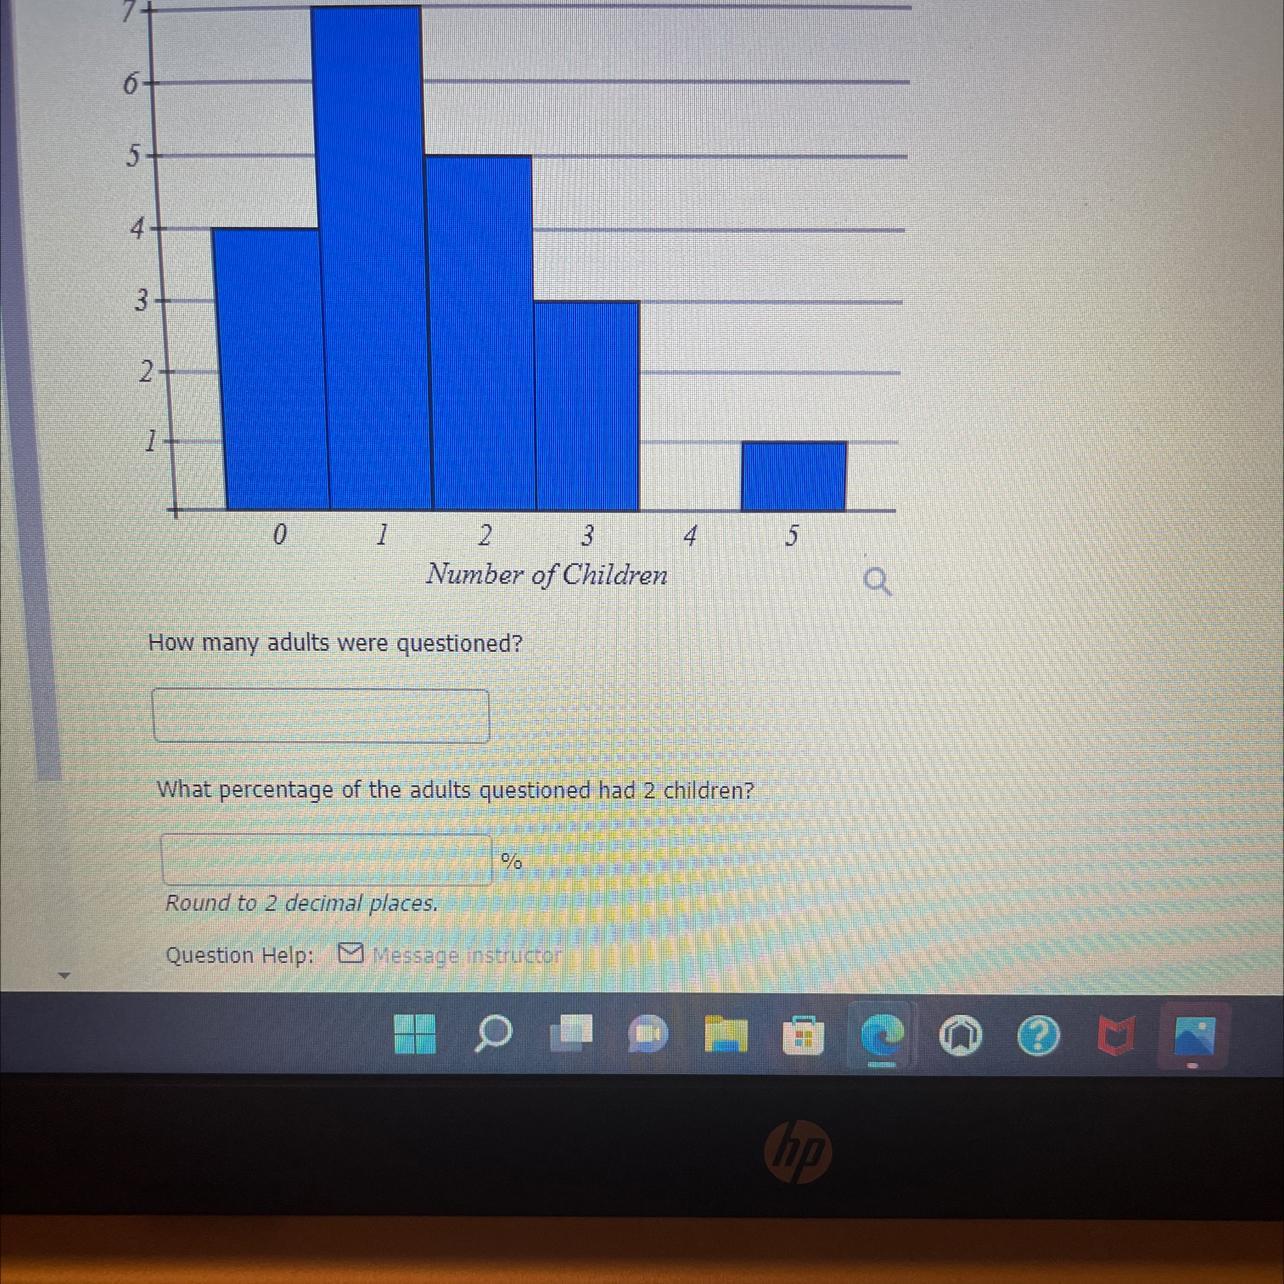 A Group Have In Their Families. The Bar Graph Of Adults Were Asked How Many Children They Below Shows